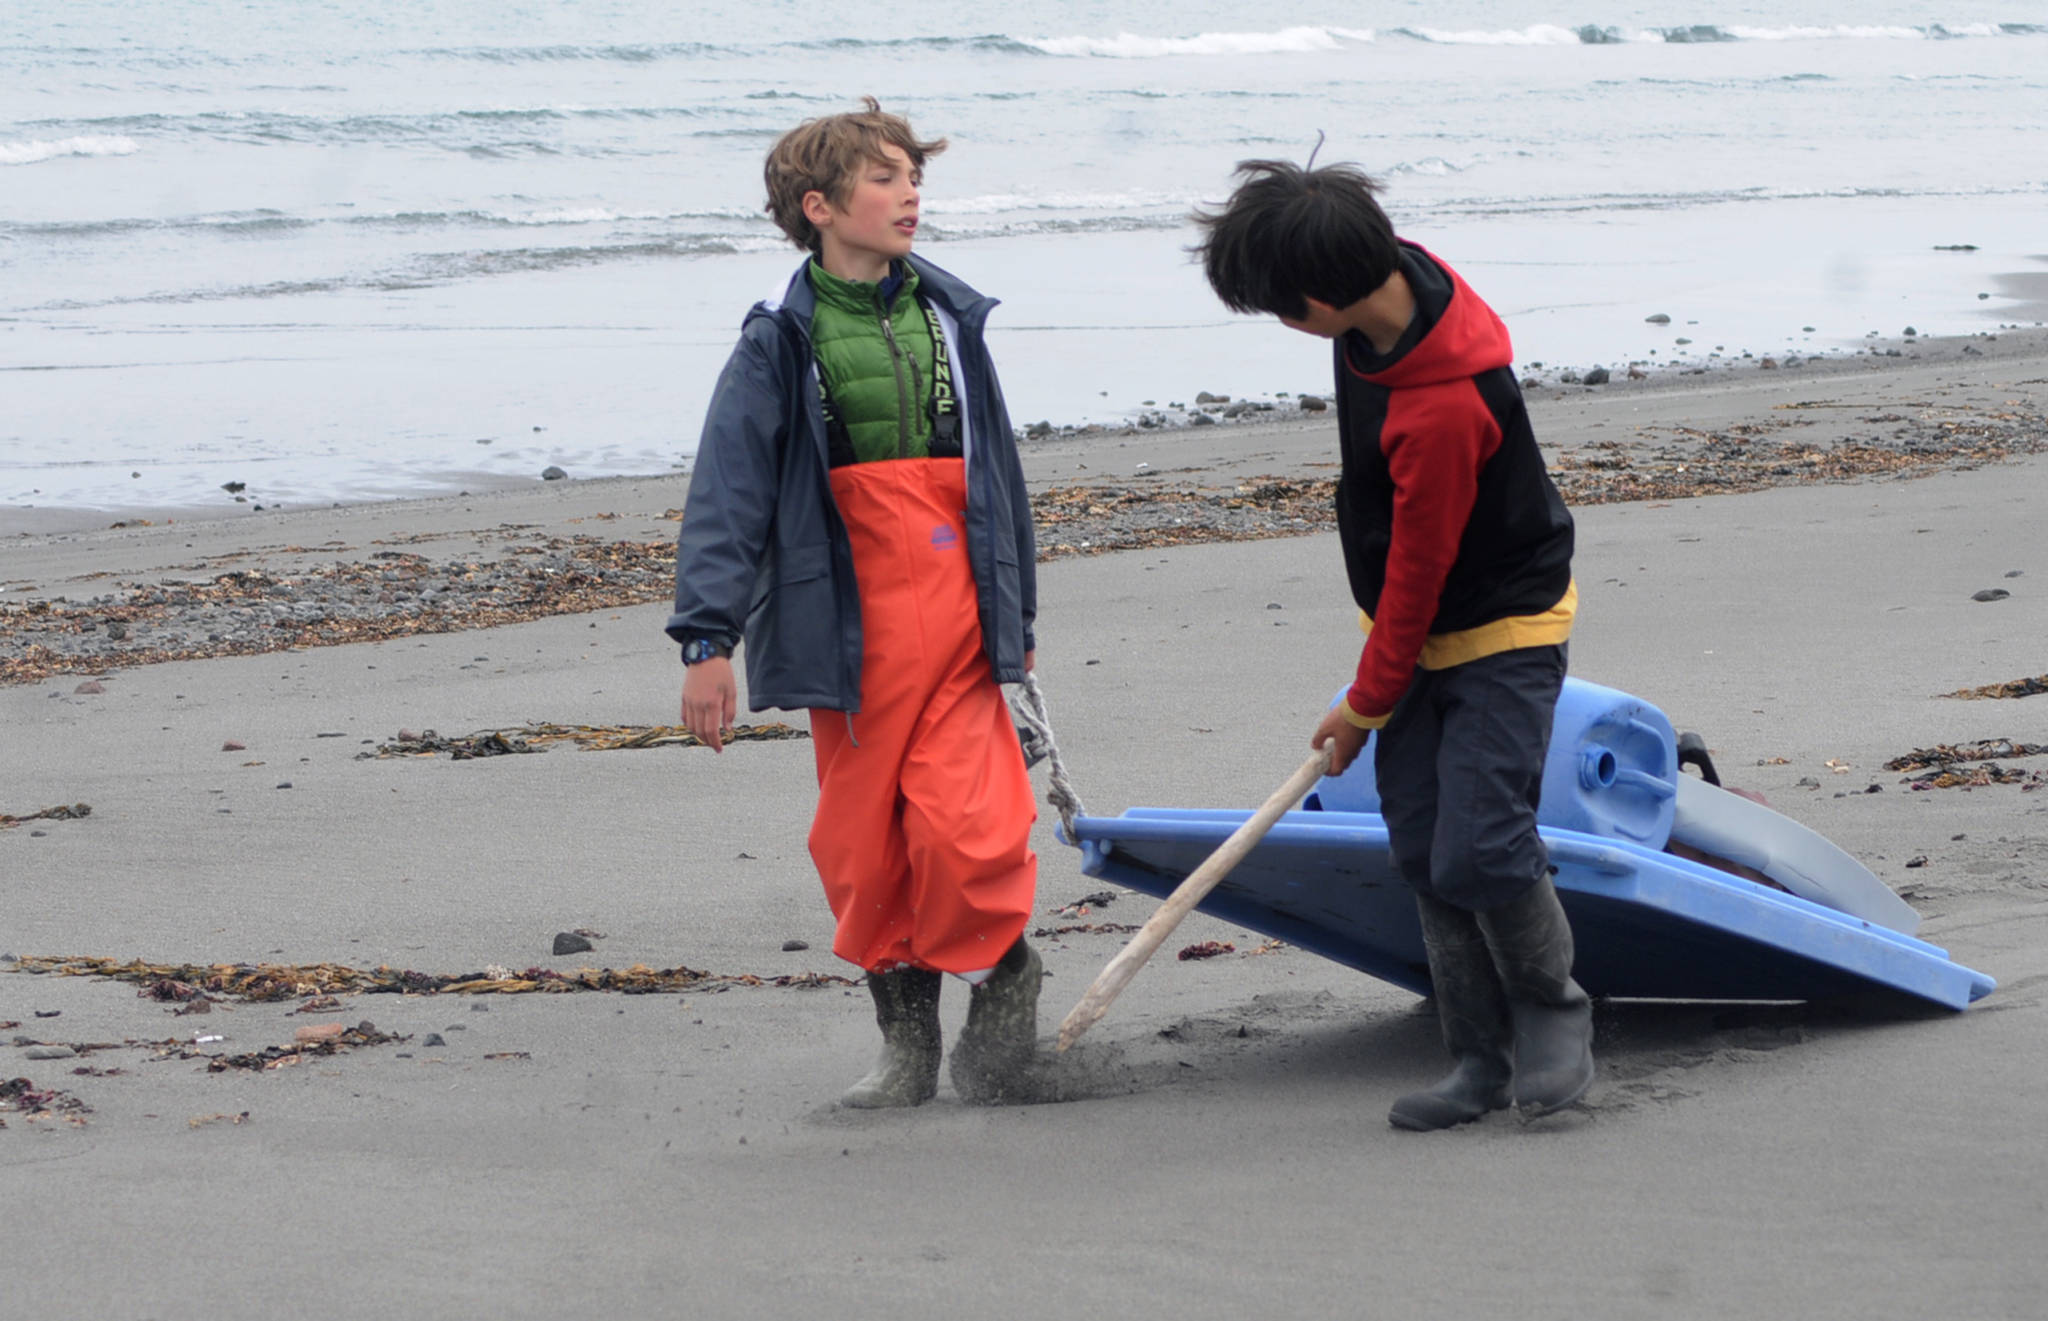 Johannes Bynagle (left) and Gautama Iwamura, both homeschool students through the Kenai Peninsula Borough School District Connections program, tug a makeshift sled loaded with marine debris down the beach on Sunday, June 3, 2017 on Augustine Island, Alaska. The two were participants in a trip organized by the Homer-based nonprofit Center for Alaskan Coastal Studies to clean up debris along the beaches of the remote island in Cook Inlet. (Elizabeth Earl/Peninsula Clarion)  Johannes Bynagle (left) and Gautama Iwamura, both homeschool students through the Kenai Peninsula Borough School District Connections program, tug a makeshift sled loaded with marine debris down the beach on Sunday on Augustine Island. The two were participants in a trip organized by the Homer-based nonprofit Center for Alaskan Coastal Studies to clean up debris along the beaches of the remote island in Cook Inlet. (Elizabeth Earl/Peninsula Clarion)